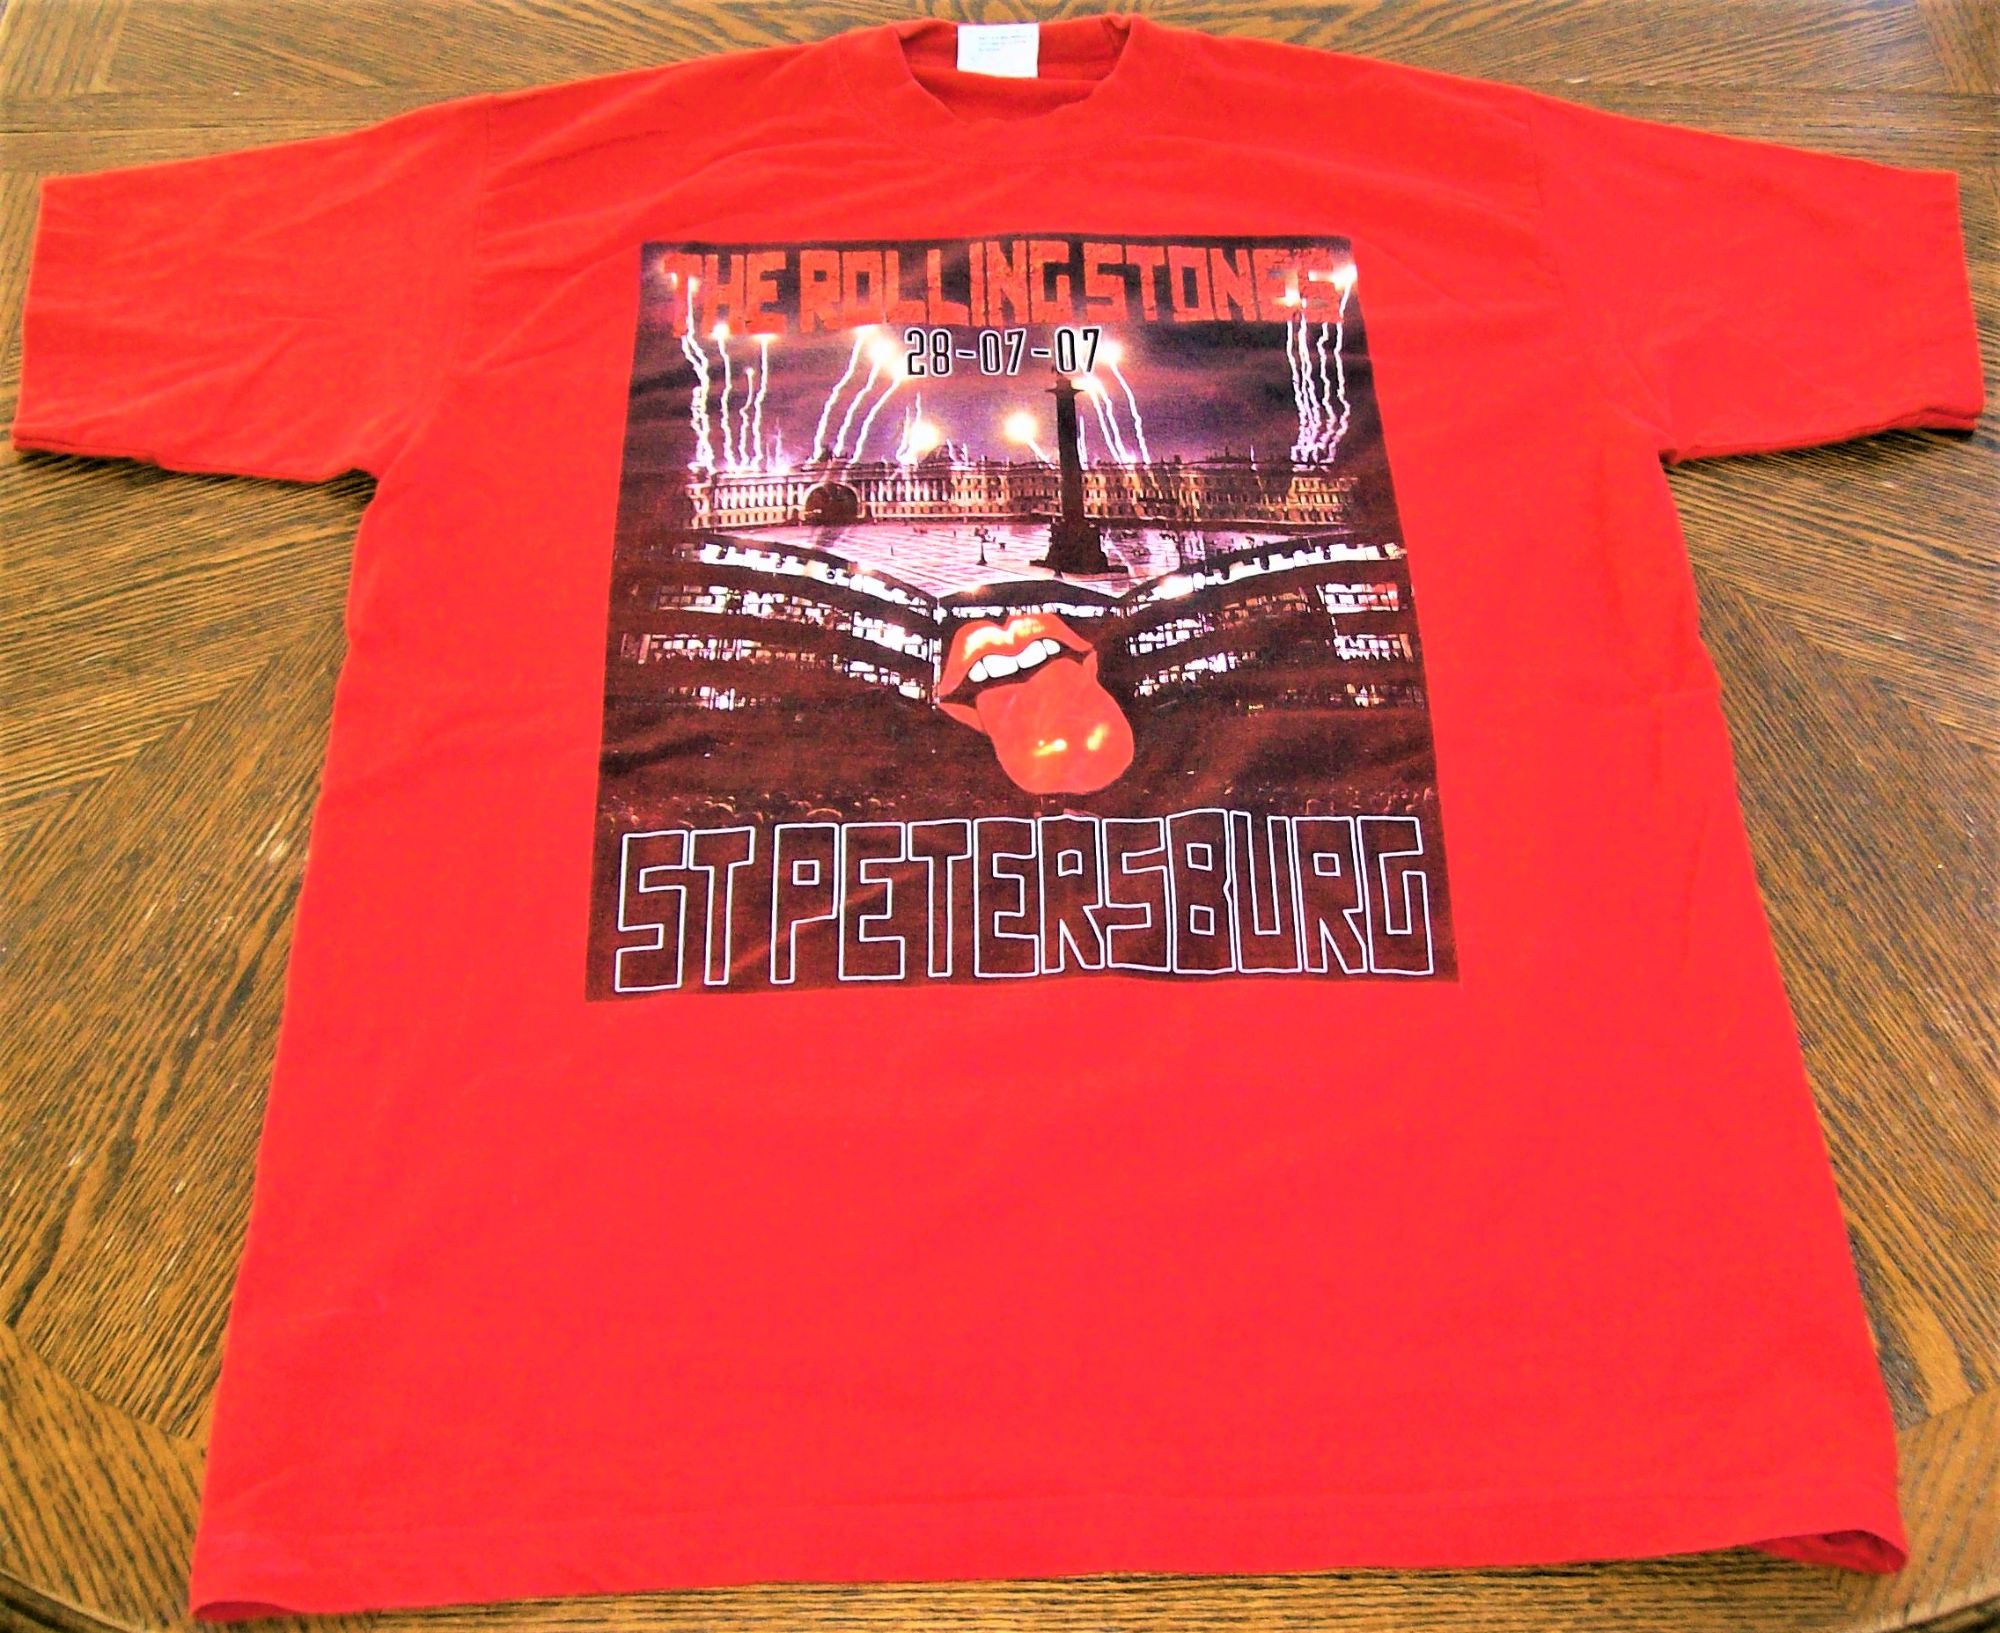 THE ROLLING STONES CONCERT T-SHIRT ST. PETERSBURG RUSSIA 28-07-07 